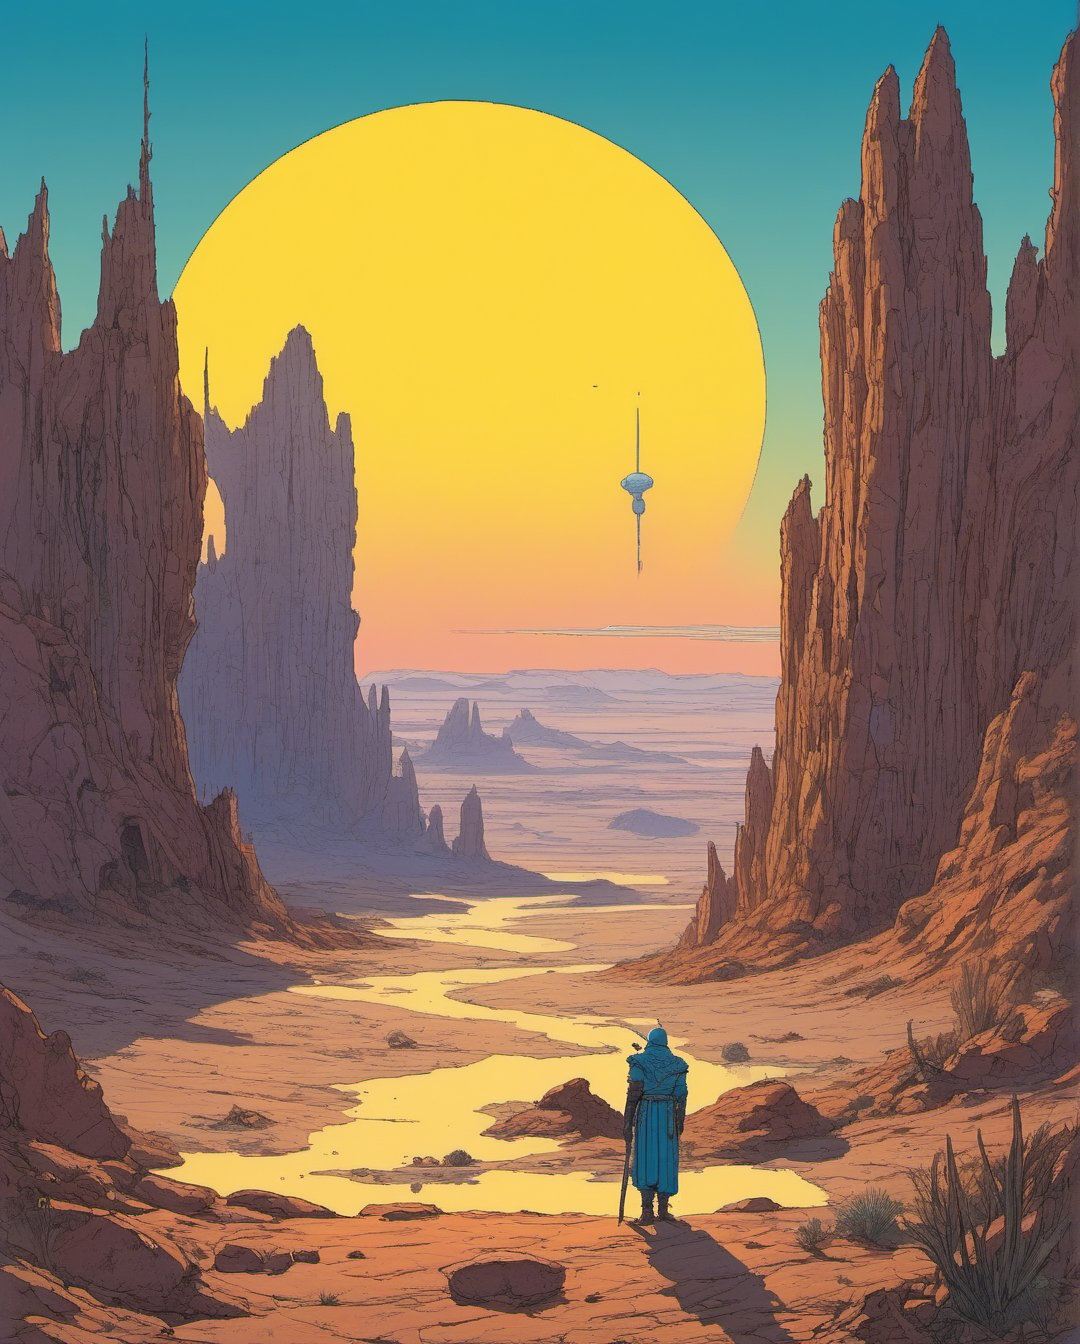 In this masterclass piece, Moebius's distinctive style shines through. A majestic alien planet sprawls before us, bathed in the warm glow of a blue giant star and flanked by a yellow dwarf. In the foreground, a primal aborigine stands tall, its ears adorned with tassels, black claws extending from its fingers, and piercing blue eyes fixed intently on the viewer. The spear held aloft features an obsidian tip, while the surrounding savannah landscape stretches out in eerie surrealism, punctuated by inverted neon hues dripping like a rainbow-colored stain across the composition.